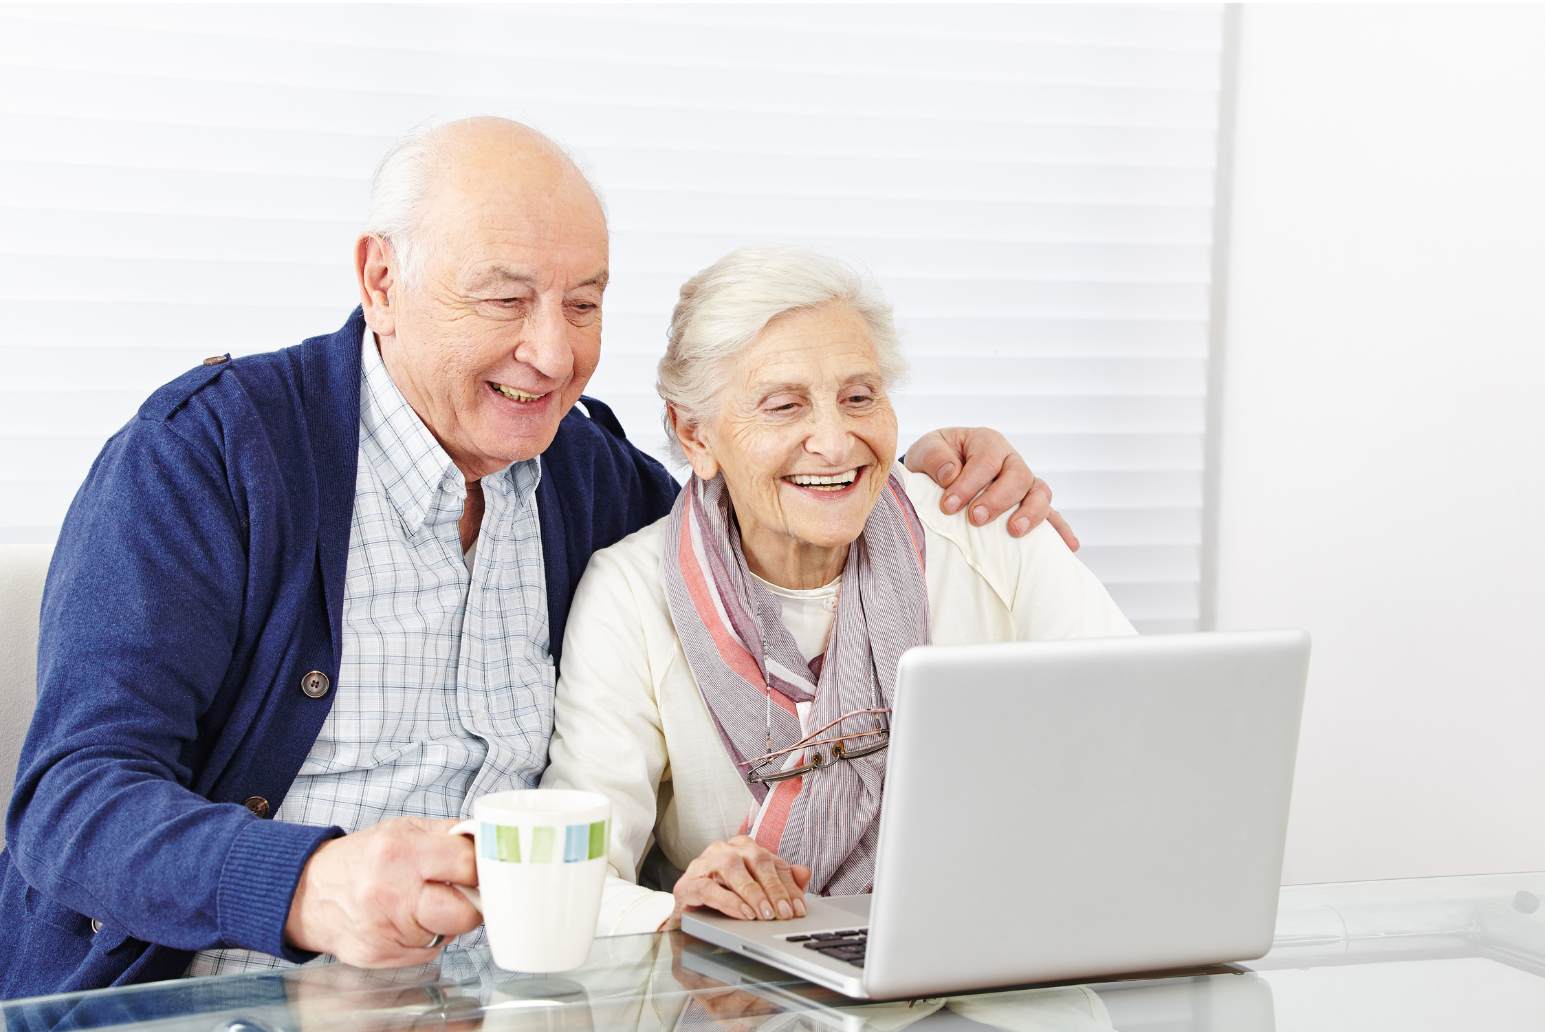 Elderly couple playing computer games on a Microsoft computer